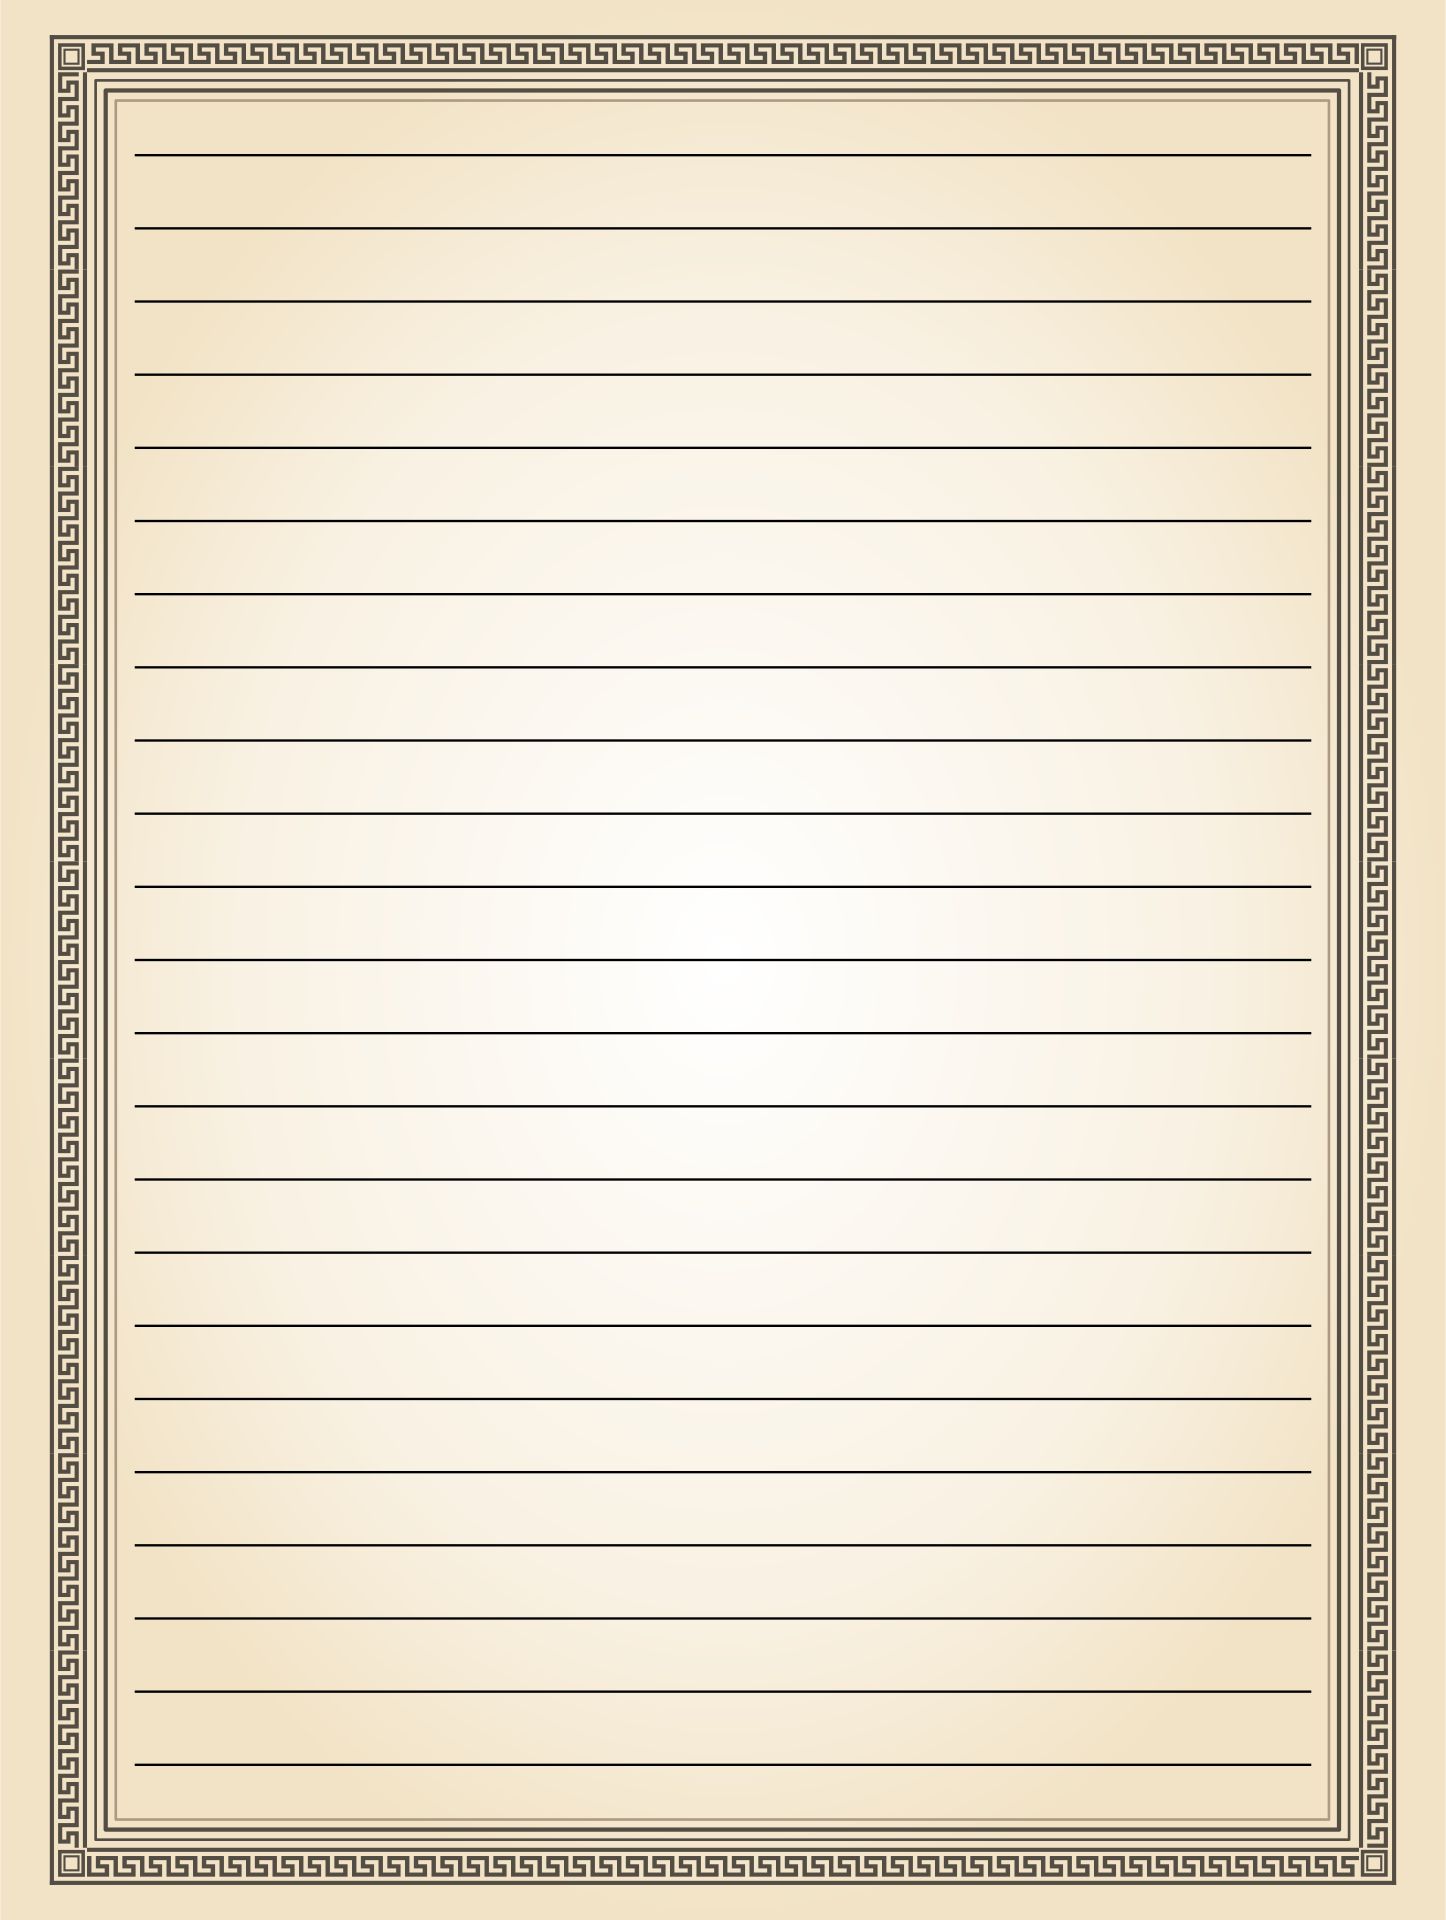 Free Printable Lined Writing Paper With Borders